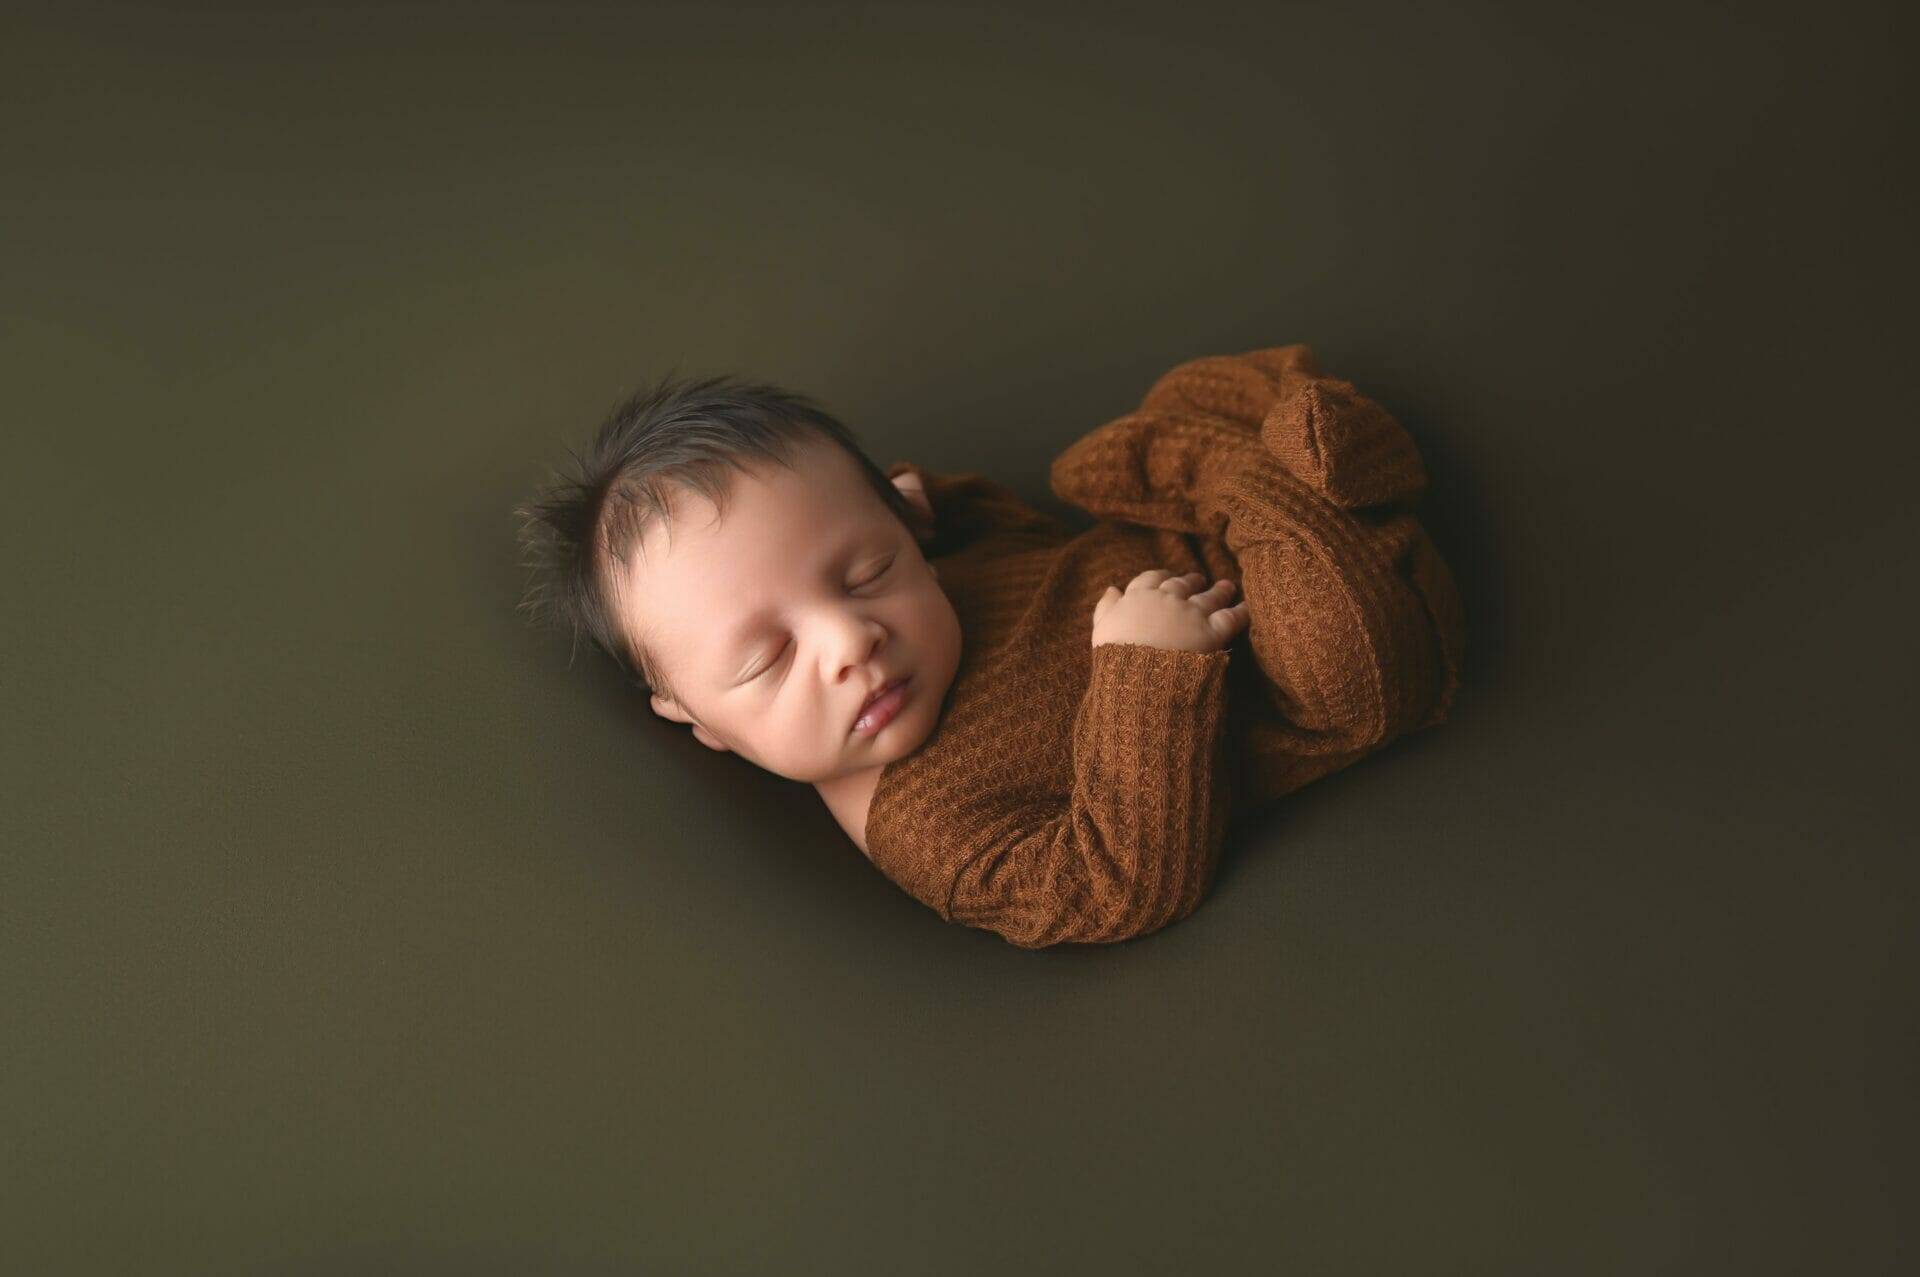 posed newborn baby on green background with brown outfit on